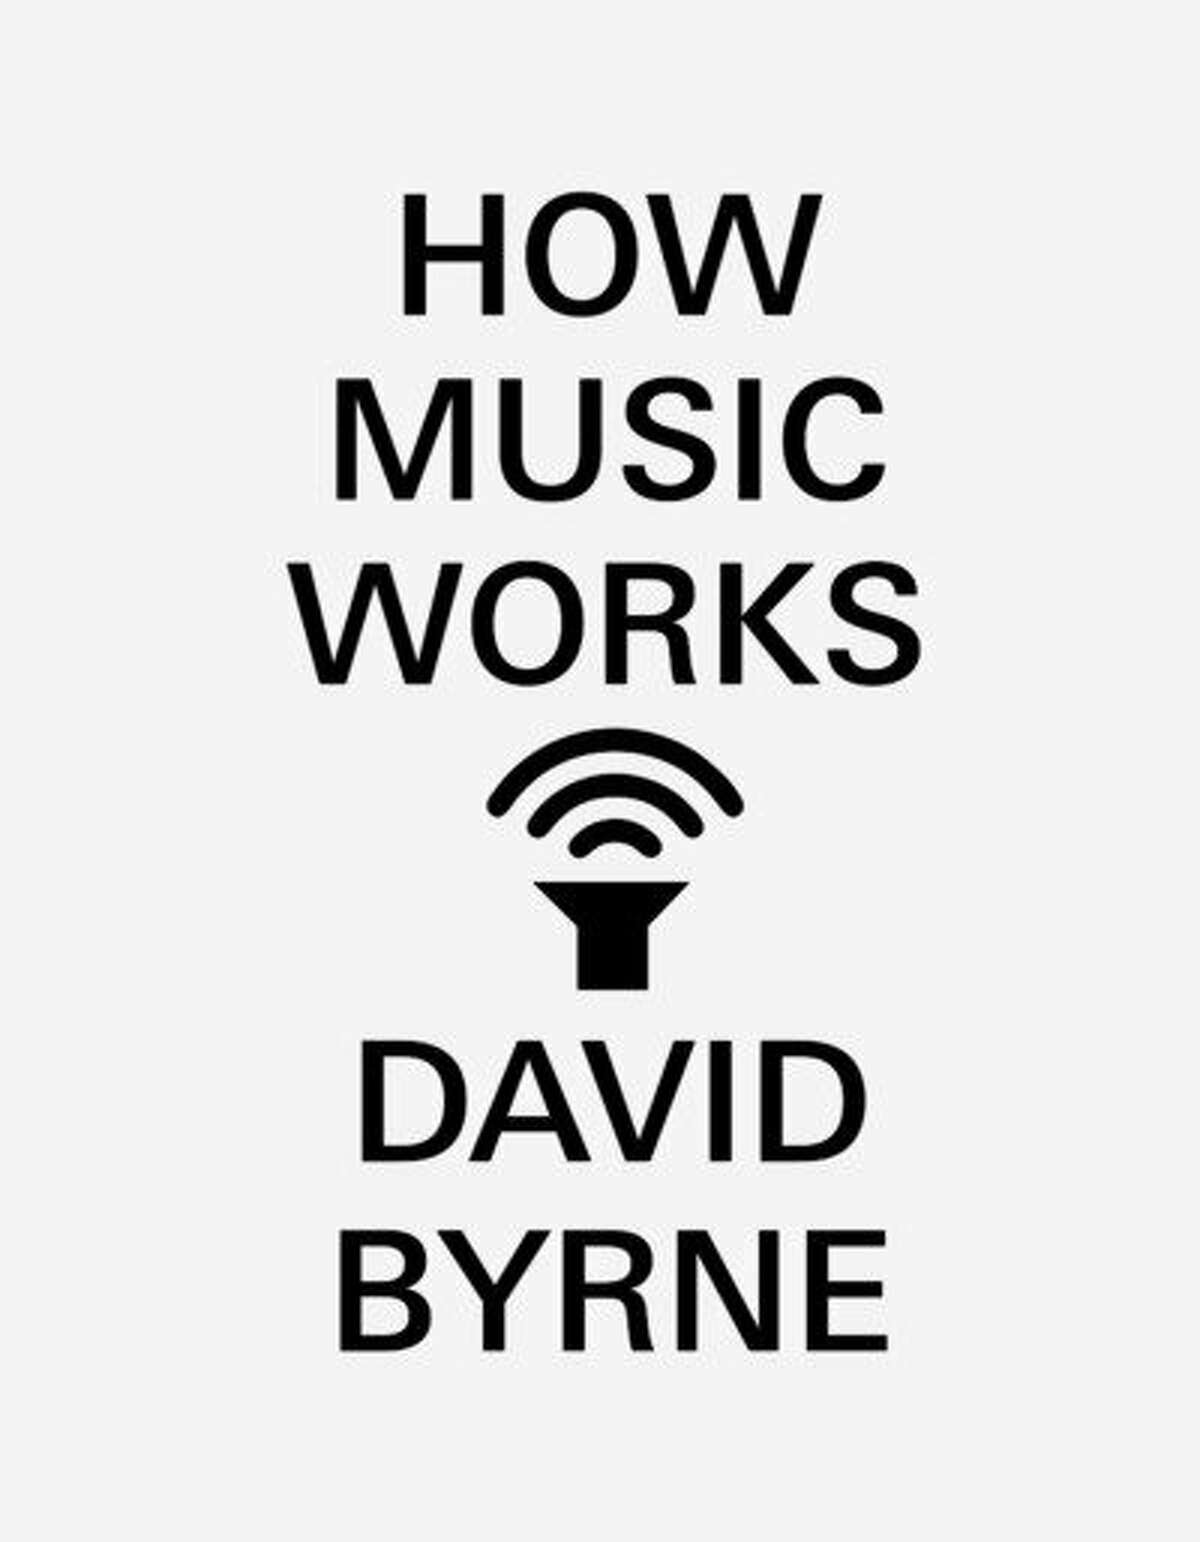 "How Music Works," by David Byrne, is McSweeney's best-selling title.